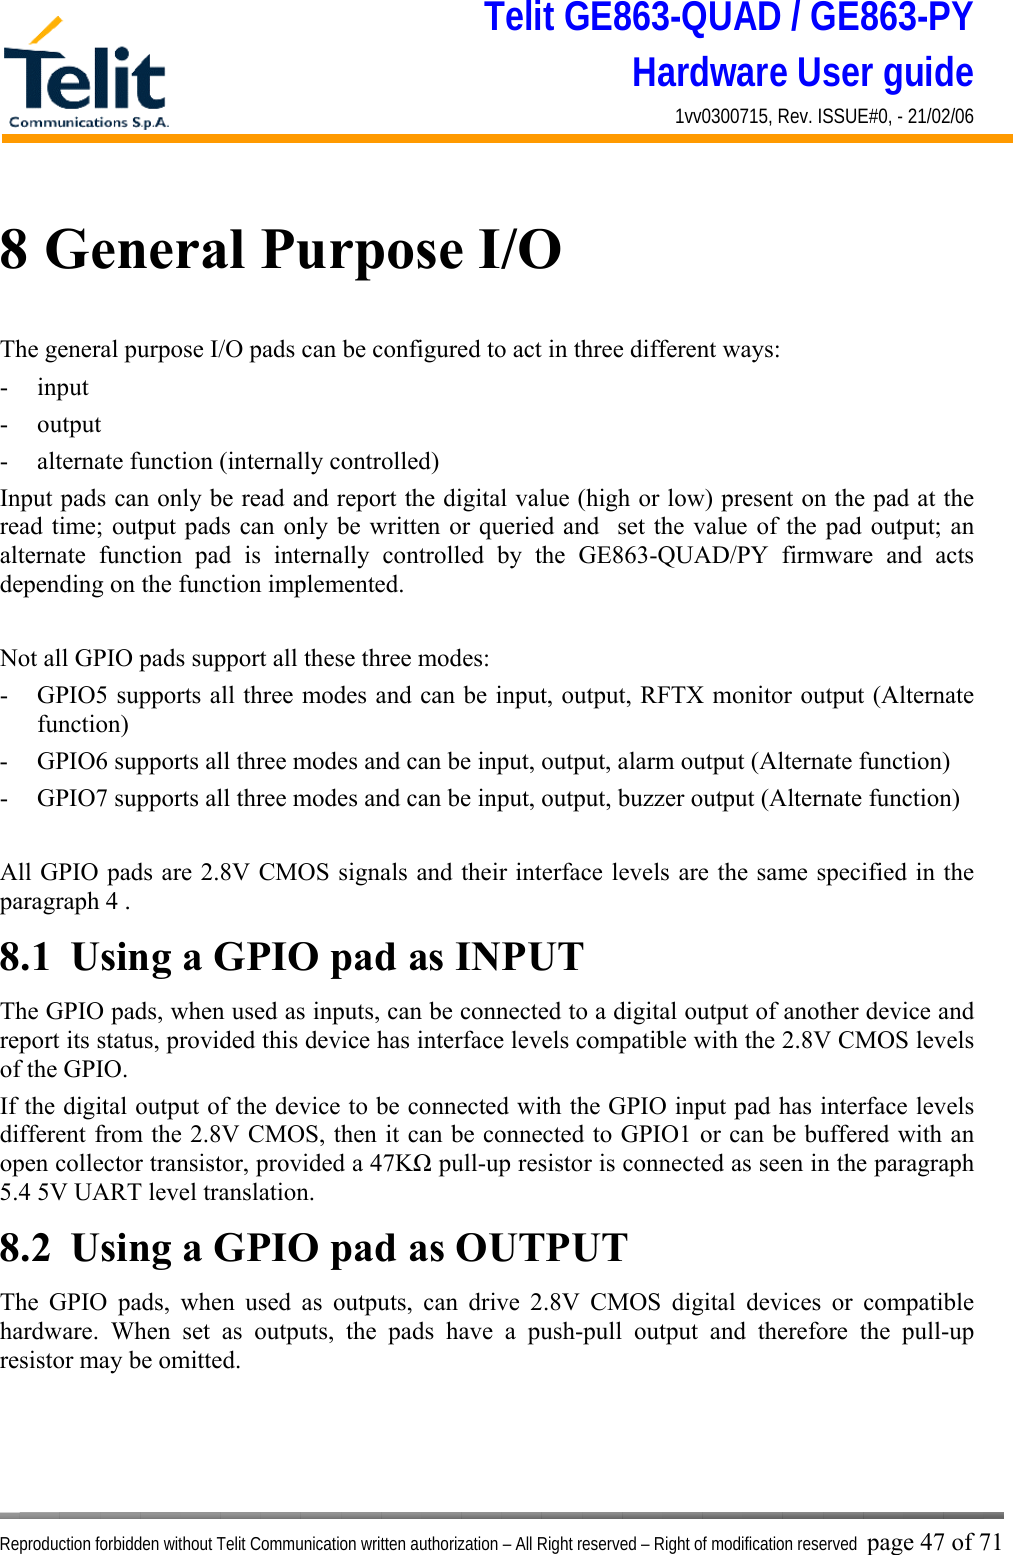 Telit GE863-QUAD / GE863-PY Hardware User guide 1vv0300715, Rev. ISSUE#0, - 21/02/06    Reproduction forbidden without Telit Communication written authorization – All Right reserved – Right of modification reserved page 47 of 71 8 General Purpose I/O The general purpose I/O pads can be configured to act in three different ways: - input - output - alternate function (internally controlled) Input pads can only be read and report the digital value (high or low) present on the pad at the read time; output pads can only be written or queried and  set the value of the pad output; an alternate function pad is internally controlled by the GE863-QUAD/PY firmware and acts depending on the function implemented.   Not all GPIO pads support all these three modes: -  GPIO5 supports all three modes and can be input, output, RFTX monitor output (Alternate function) -  GPIO6 supports all three modes and can be input, output, alarm output (Alternate function) -  GPIO7 supports all three modes and can be input, output, buzzer output (Alternate function)  All GPIO pads are 2.8V CMOS signals and their interface levels are the same specified in the paragraph 4 . 8.1  Using a GPIO pad as INPUT The GPIO pads, when used as inputs, can be connected to a digital output of another device and report its status, provided this device has interface levels compatible with the 2.8V CMOS levels of the GPIO.  If the digital output of the device to be connected with the GPIO input pad has interface levels different from the 2.8V CMOS, then it can be connected to GPIO1 or can be buffered with an open collector transistor, provided a 47KΩ pull-up resistor is connected as seen in the paragraph 5.4 5V UART level translation. 8.2  Using a GPIO pad as OUTPUT The GPIO pads, when used as outputs, can drive 2.8V CMOS digital devices or compatible hardware. When set as outputs, the pads have a push-pull output and therefore the pull-up resistor may be omitted. 